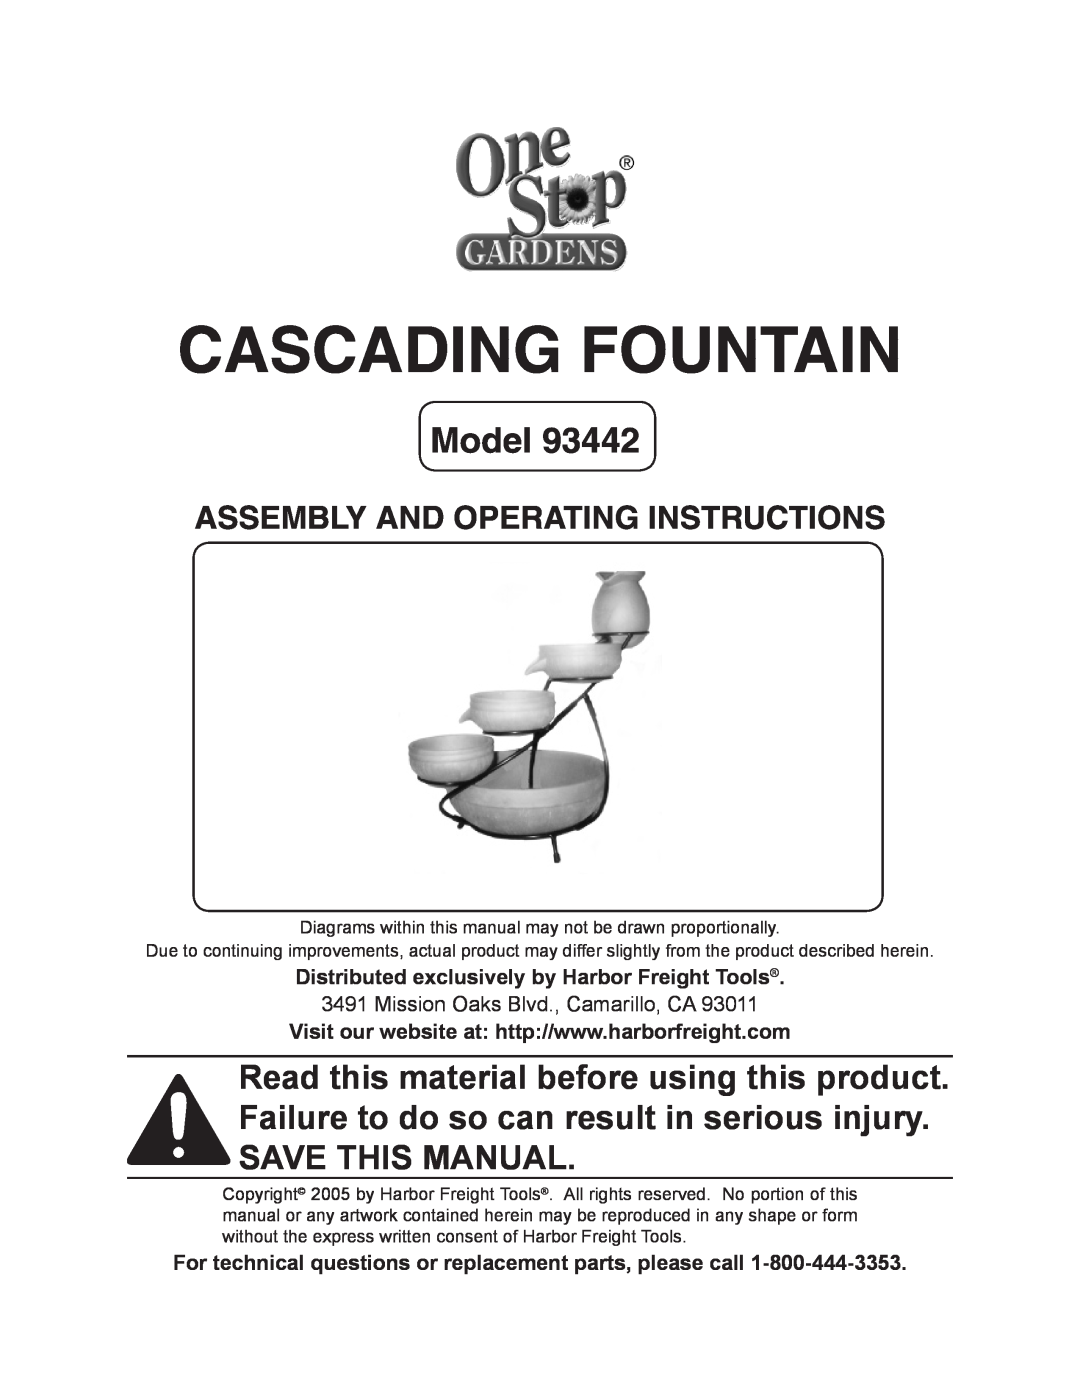 Harbor Freight Tools 93442 manual Cascading Fountain, Model, Assembly And Operating Instructions 